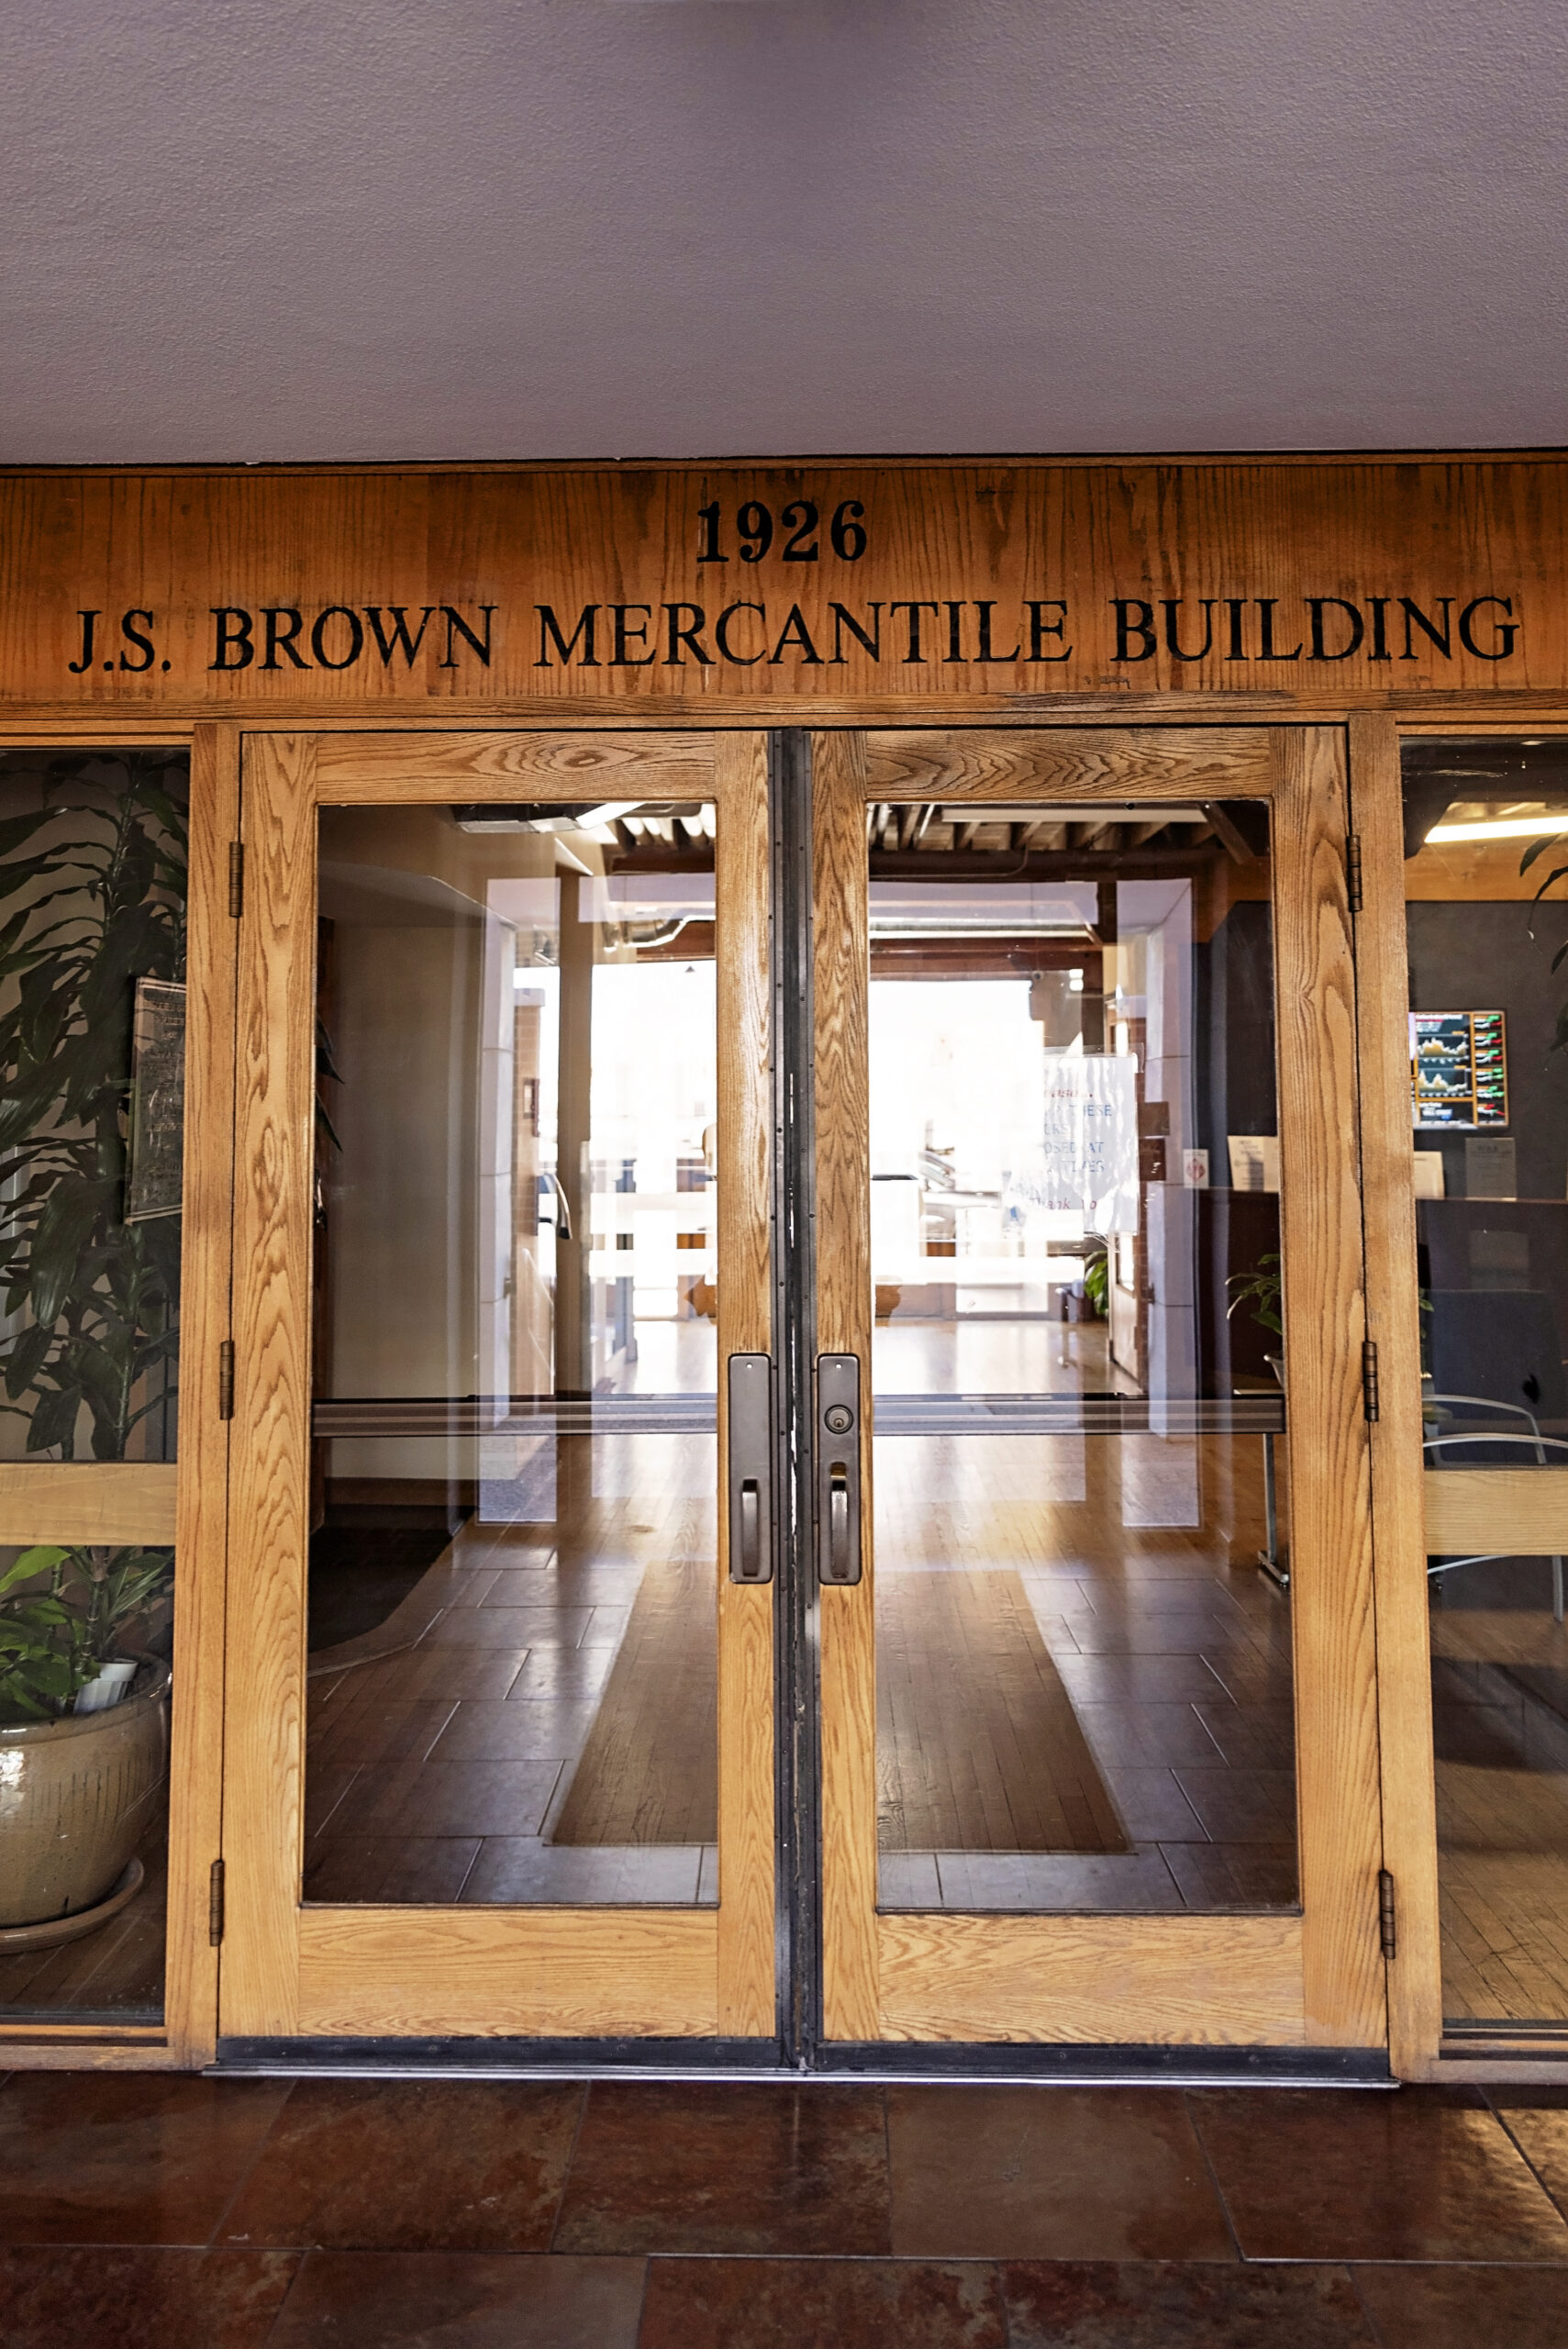 The entryway of the J.S. Brown Mercantile Building where Williams and Associates is located